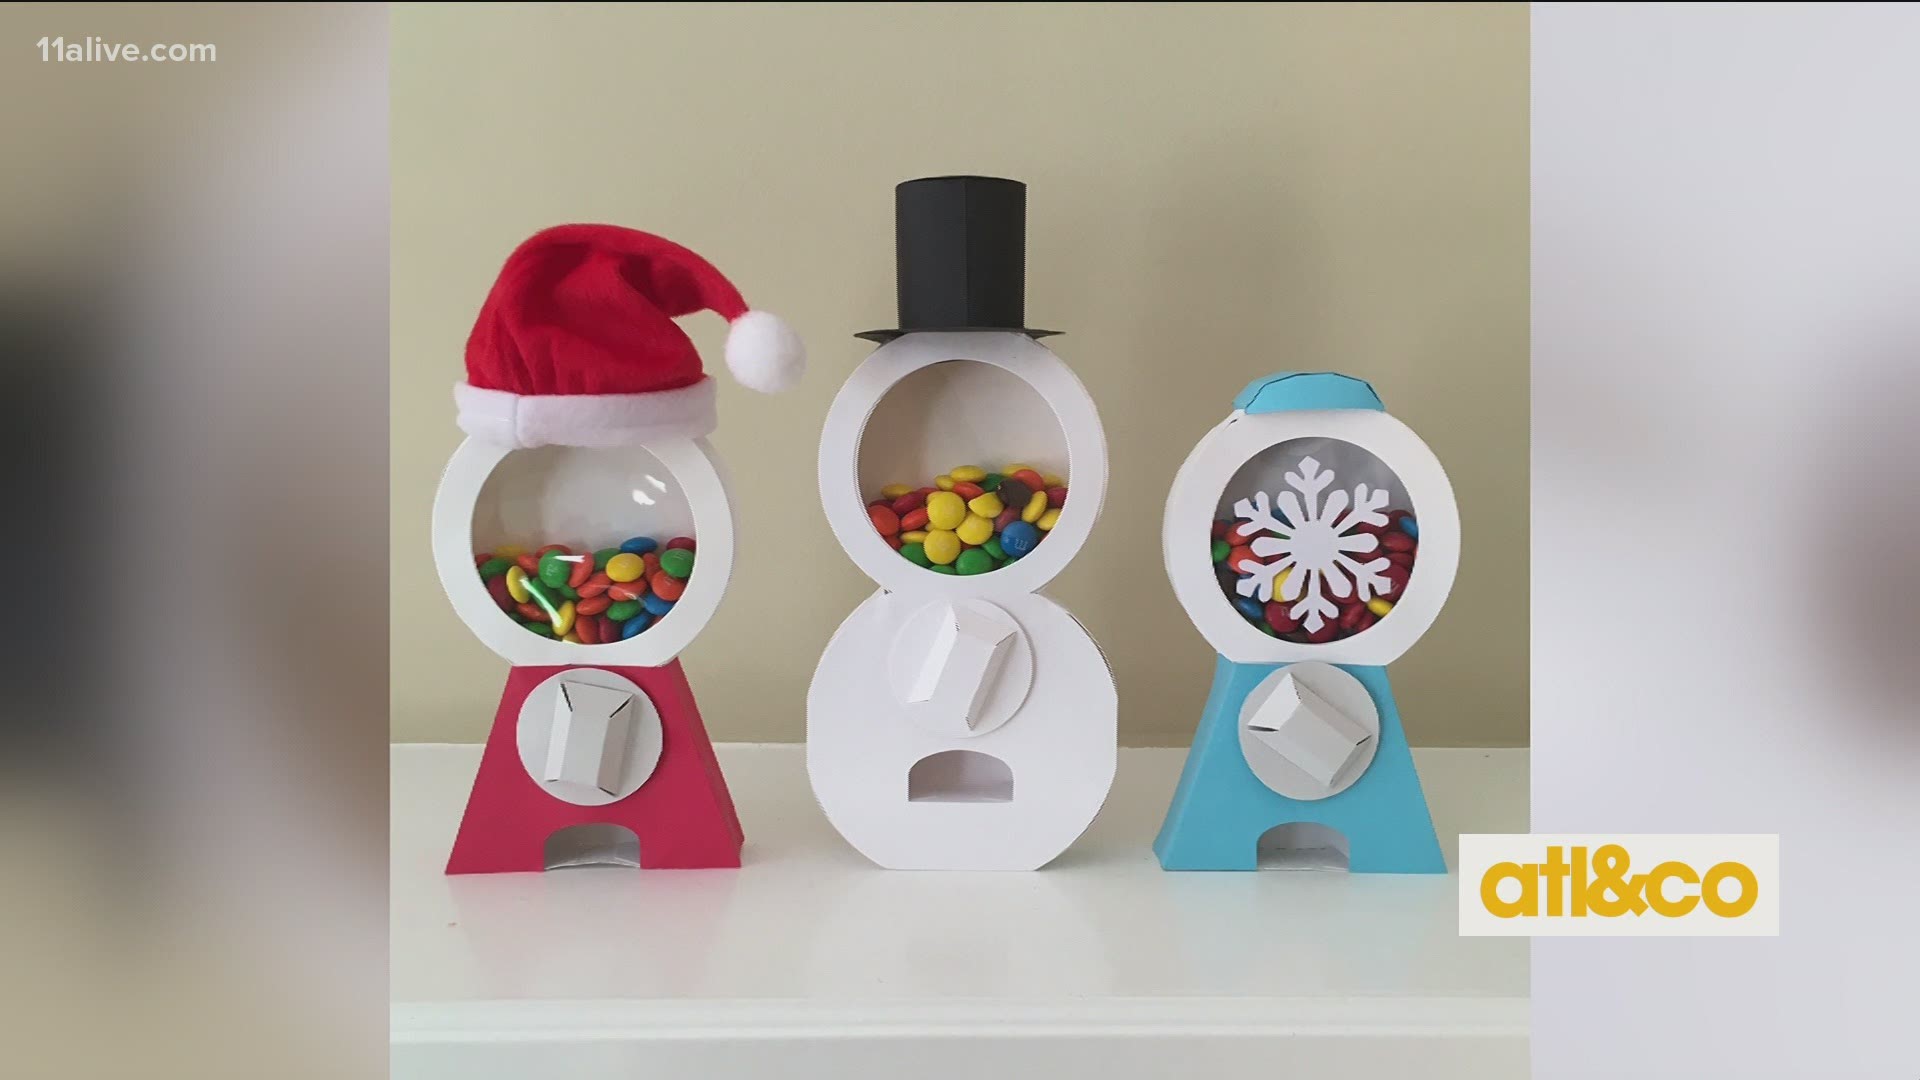 OctoGifts! 15-year-old Sebastian from Alpharetta is the brains behind this unique candy dispenser keepsake you build yourself.